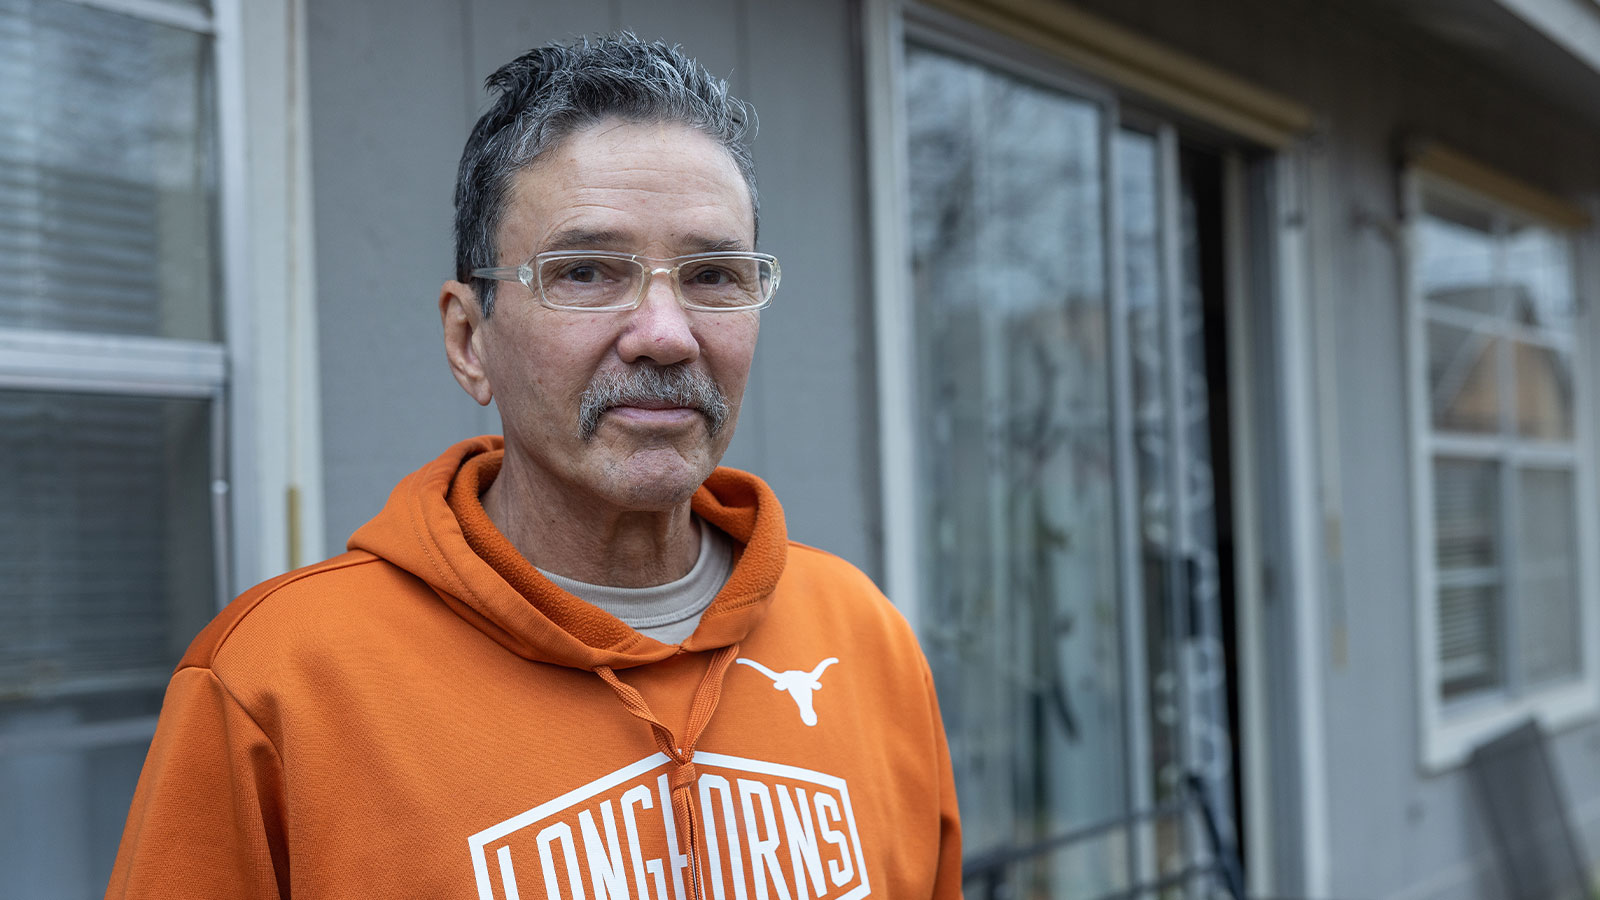 Jimmy Dee Stout outside his brother’s home in Round Rock, Texas. The idea of battling cancer in a prison with high covid-19 rates troubled Stout, whose respiratory system was compromised. “My breathing was horrible,” he said. “If I started to walk, it was like I ran a marathon.